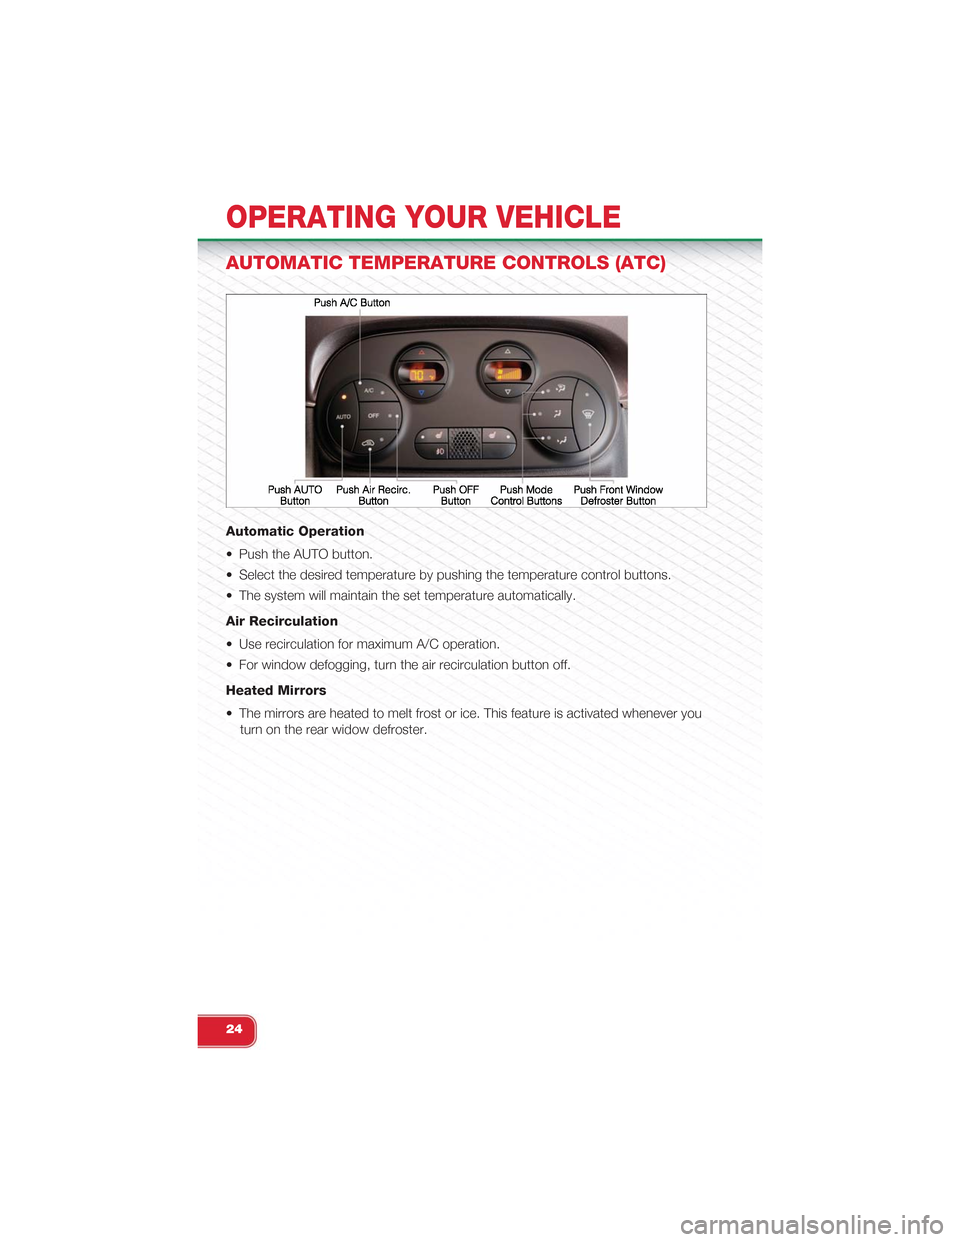 FIAT 500 ABARTH 2013 2.G User Guide AUTOMATIC TEMPERATURE CONTROLS (ATC)
Automatic Operation
• Push the AUTO button.
• Select the desired temperature by pushing the temperature control buttons.
• The system will maintain the set t